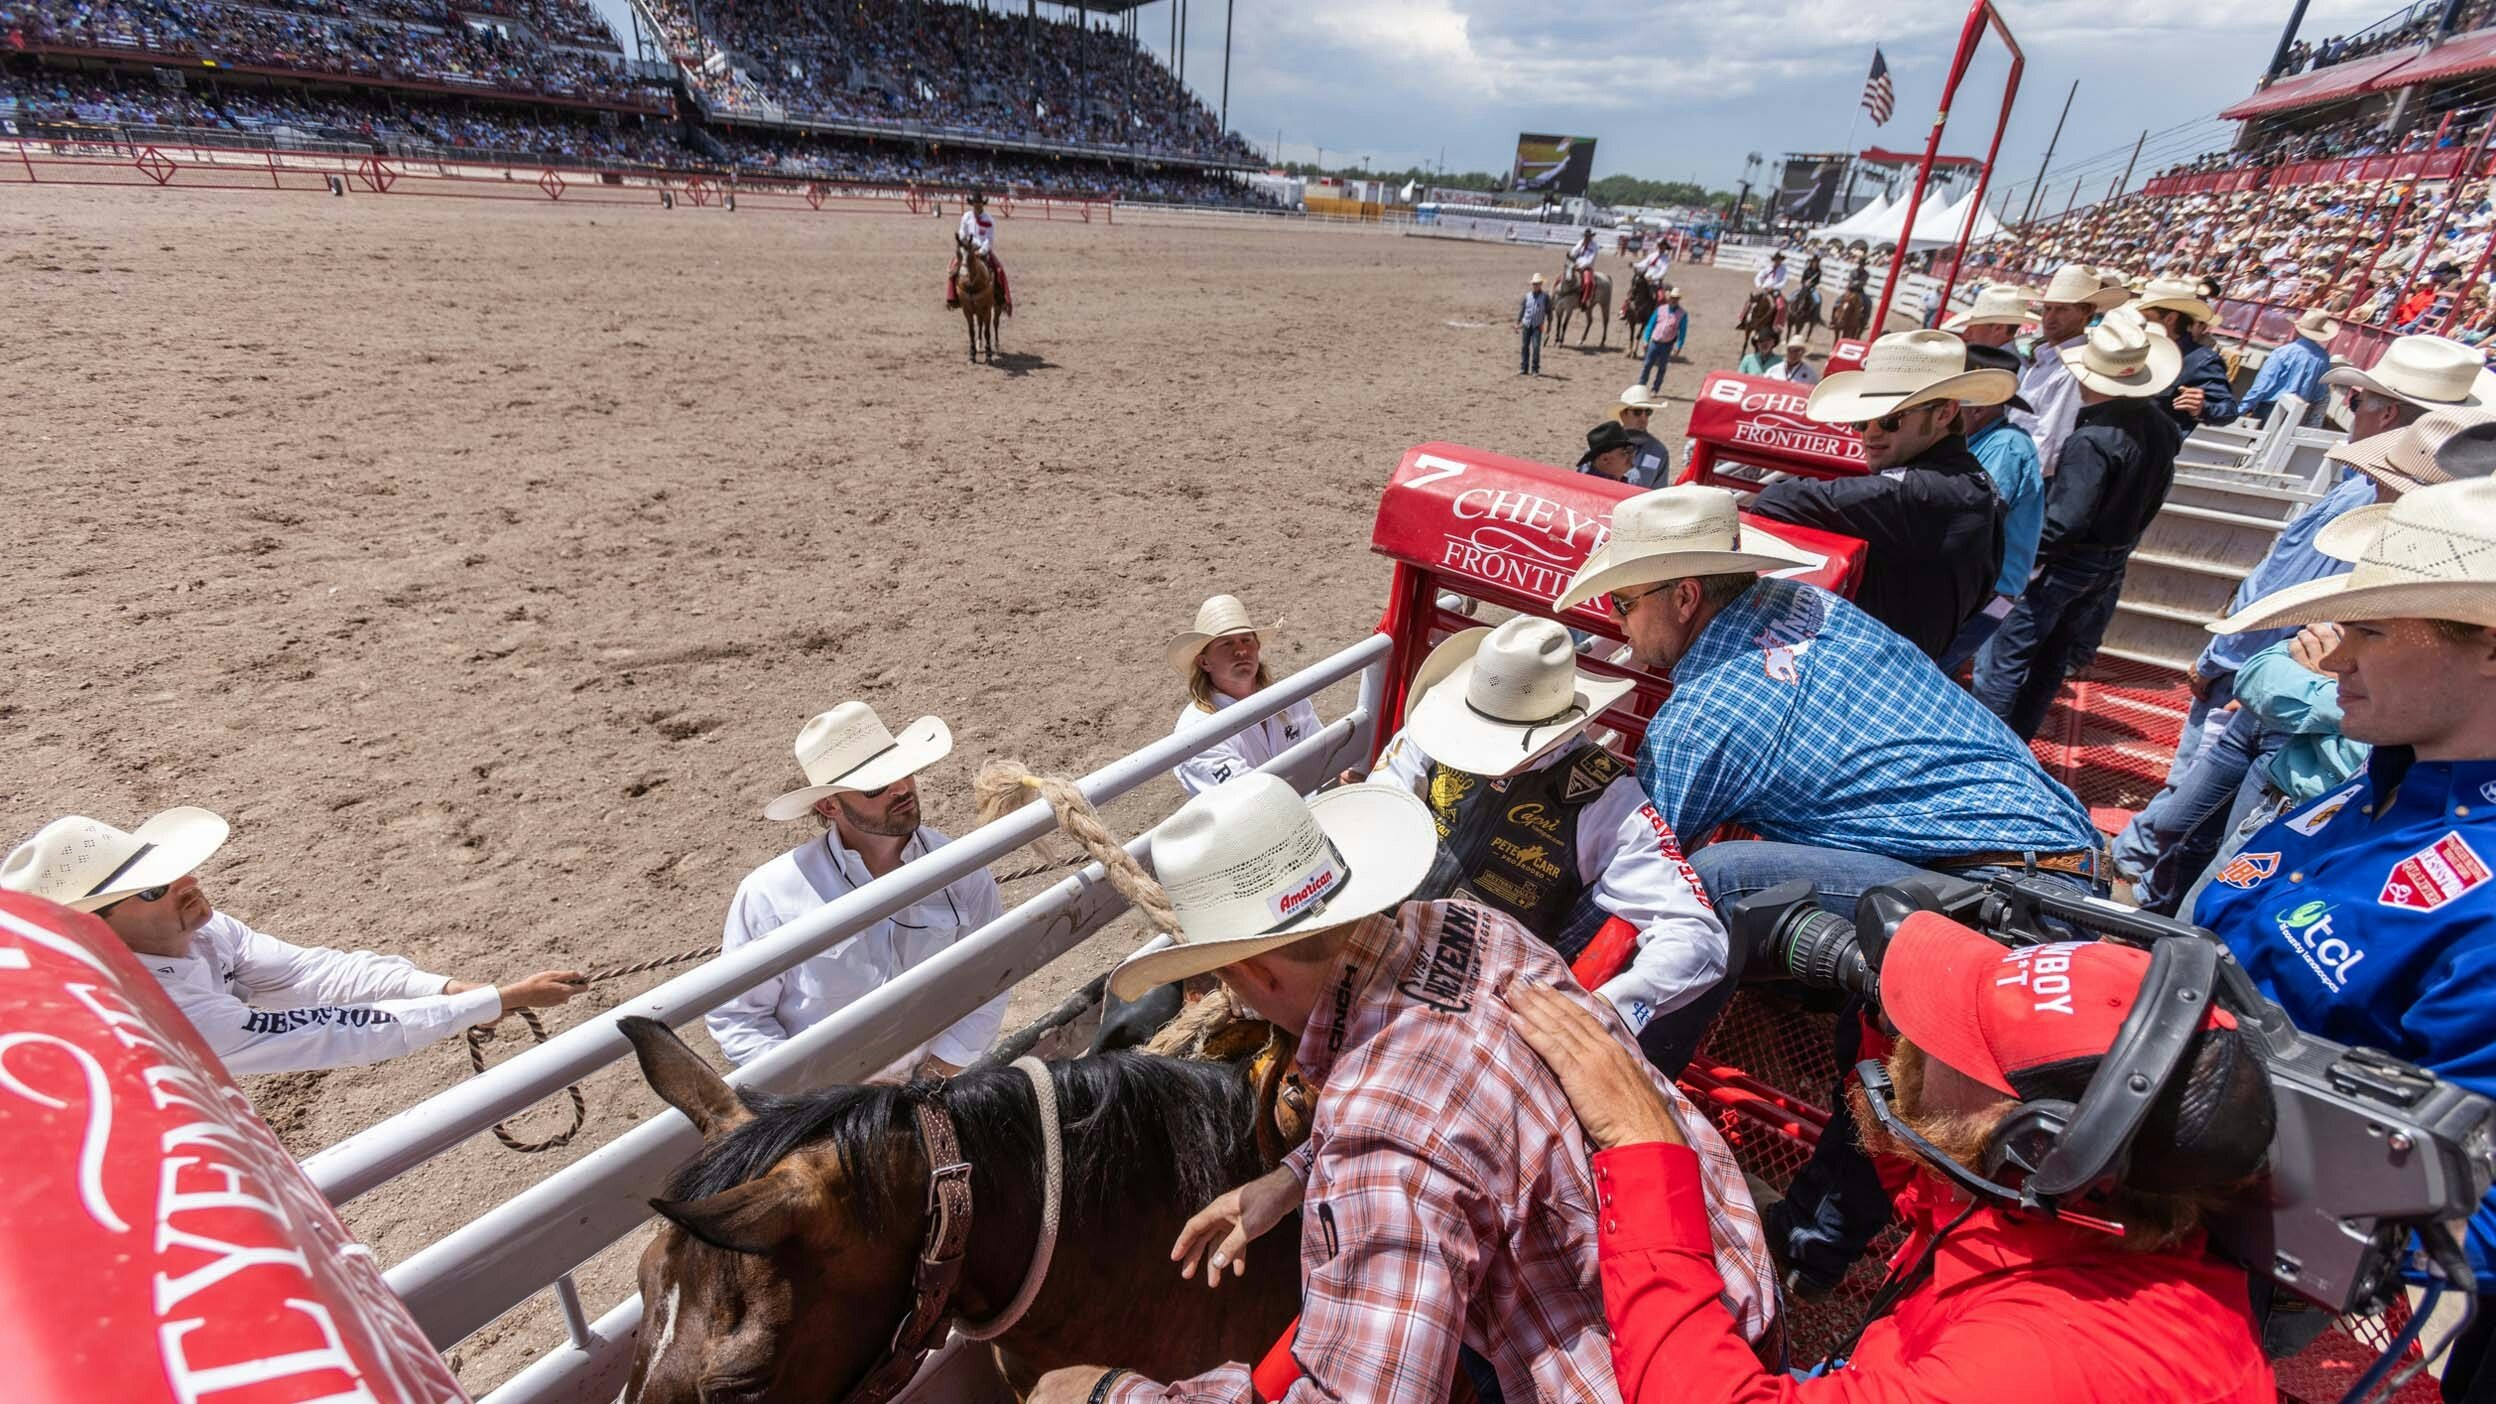 Saddle Bronc action from behind the chutes at Cheyenne Frontier Days on July 29, 2023.